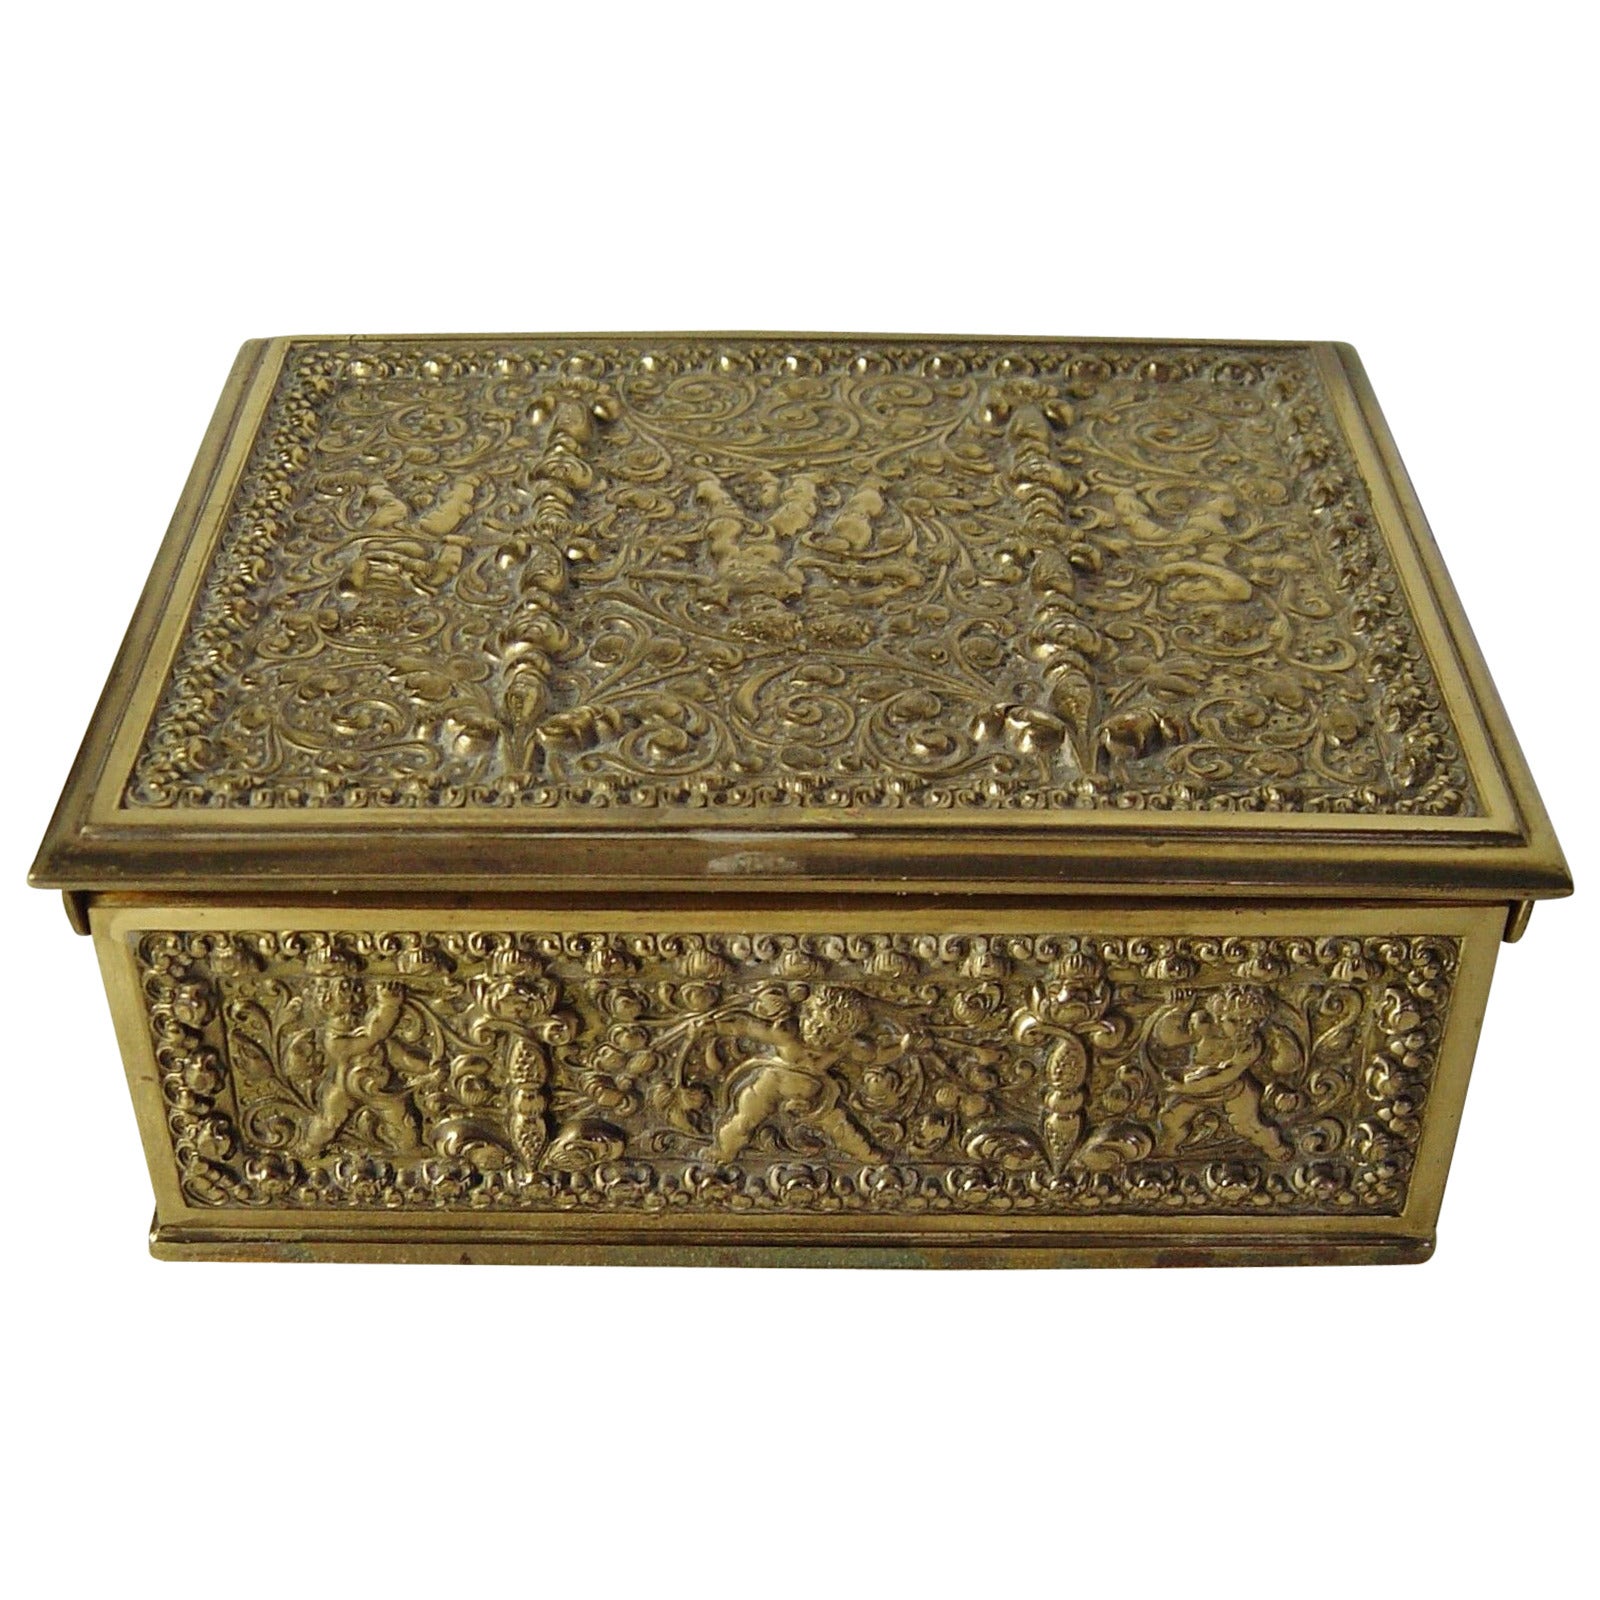 Erhard & Sons Art Nouveau Brass Repousse Tobacco or Jewelry Box